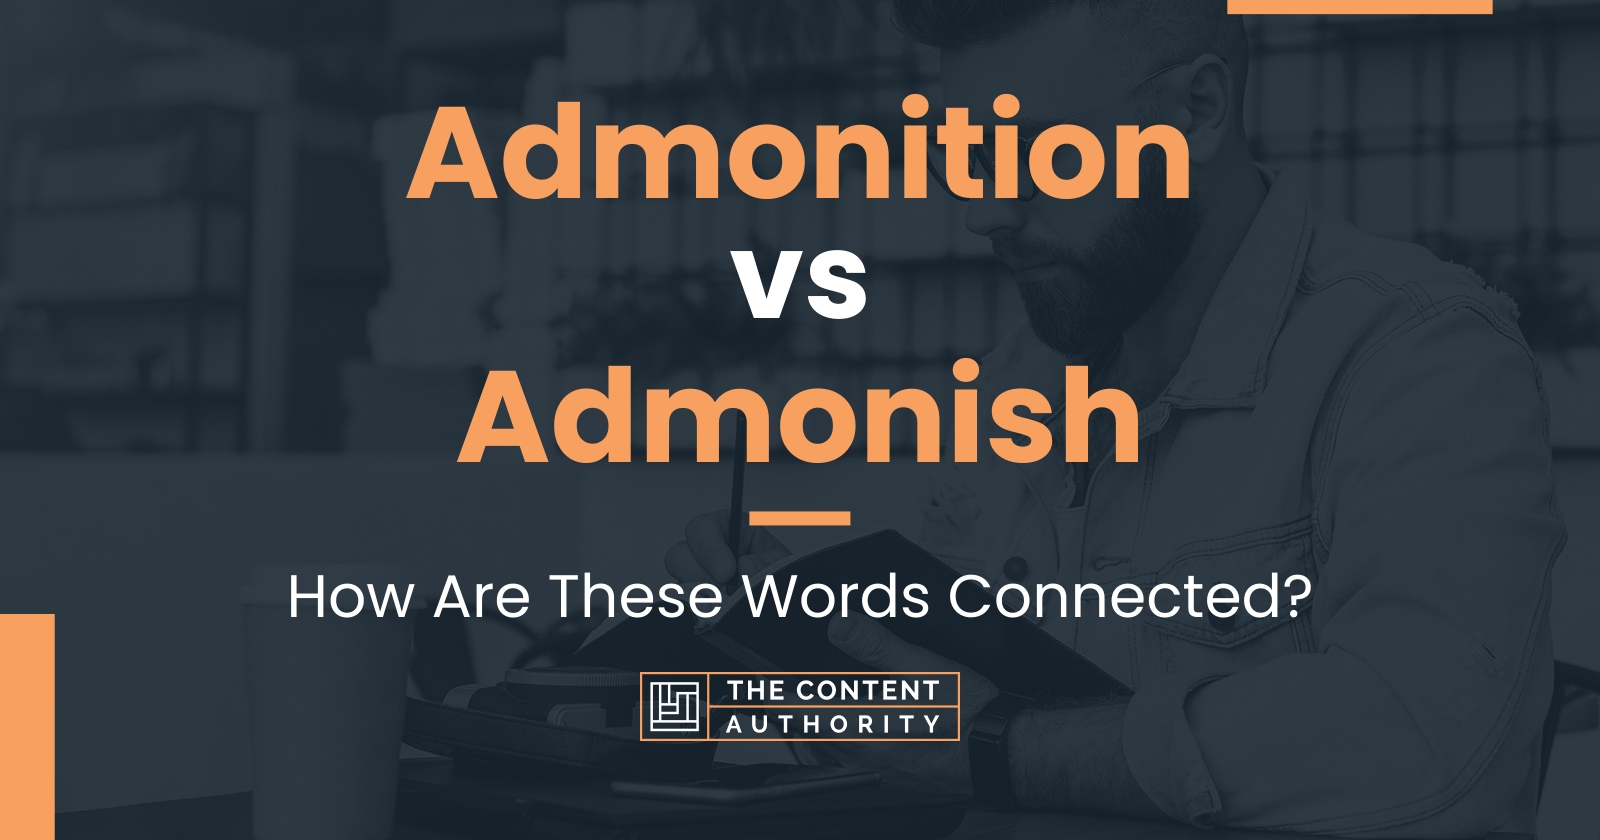 Admonition vs Admonish: How Are These Words Connected?